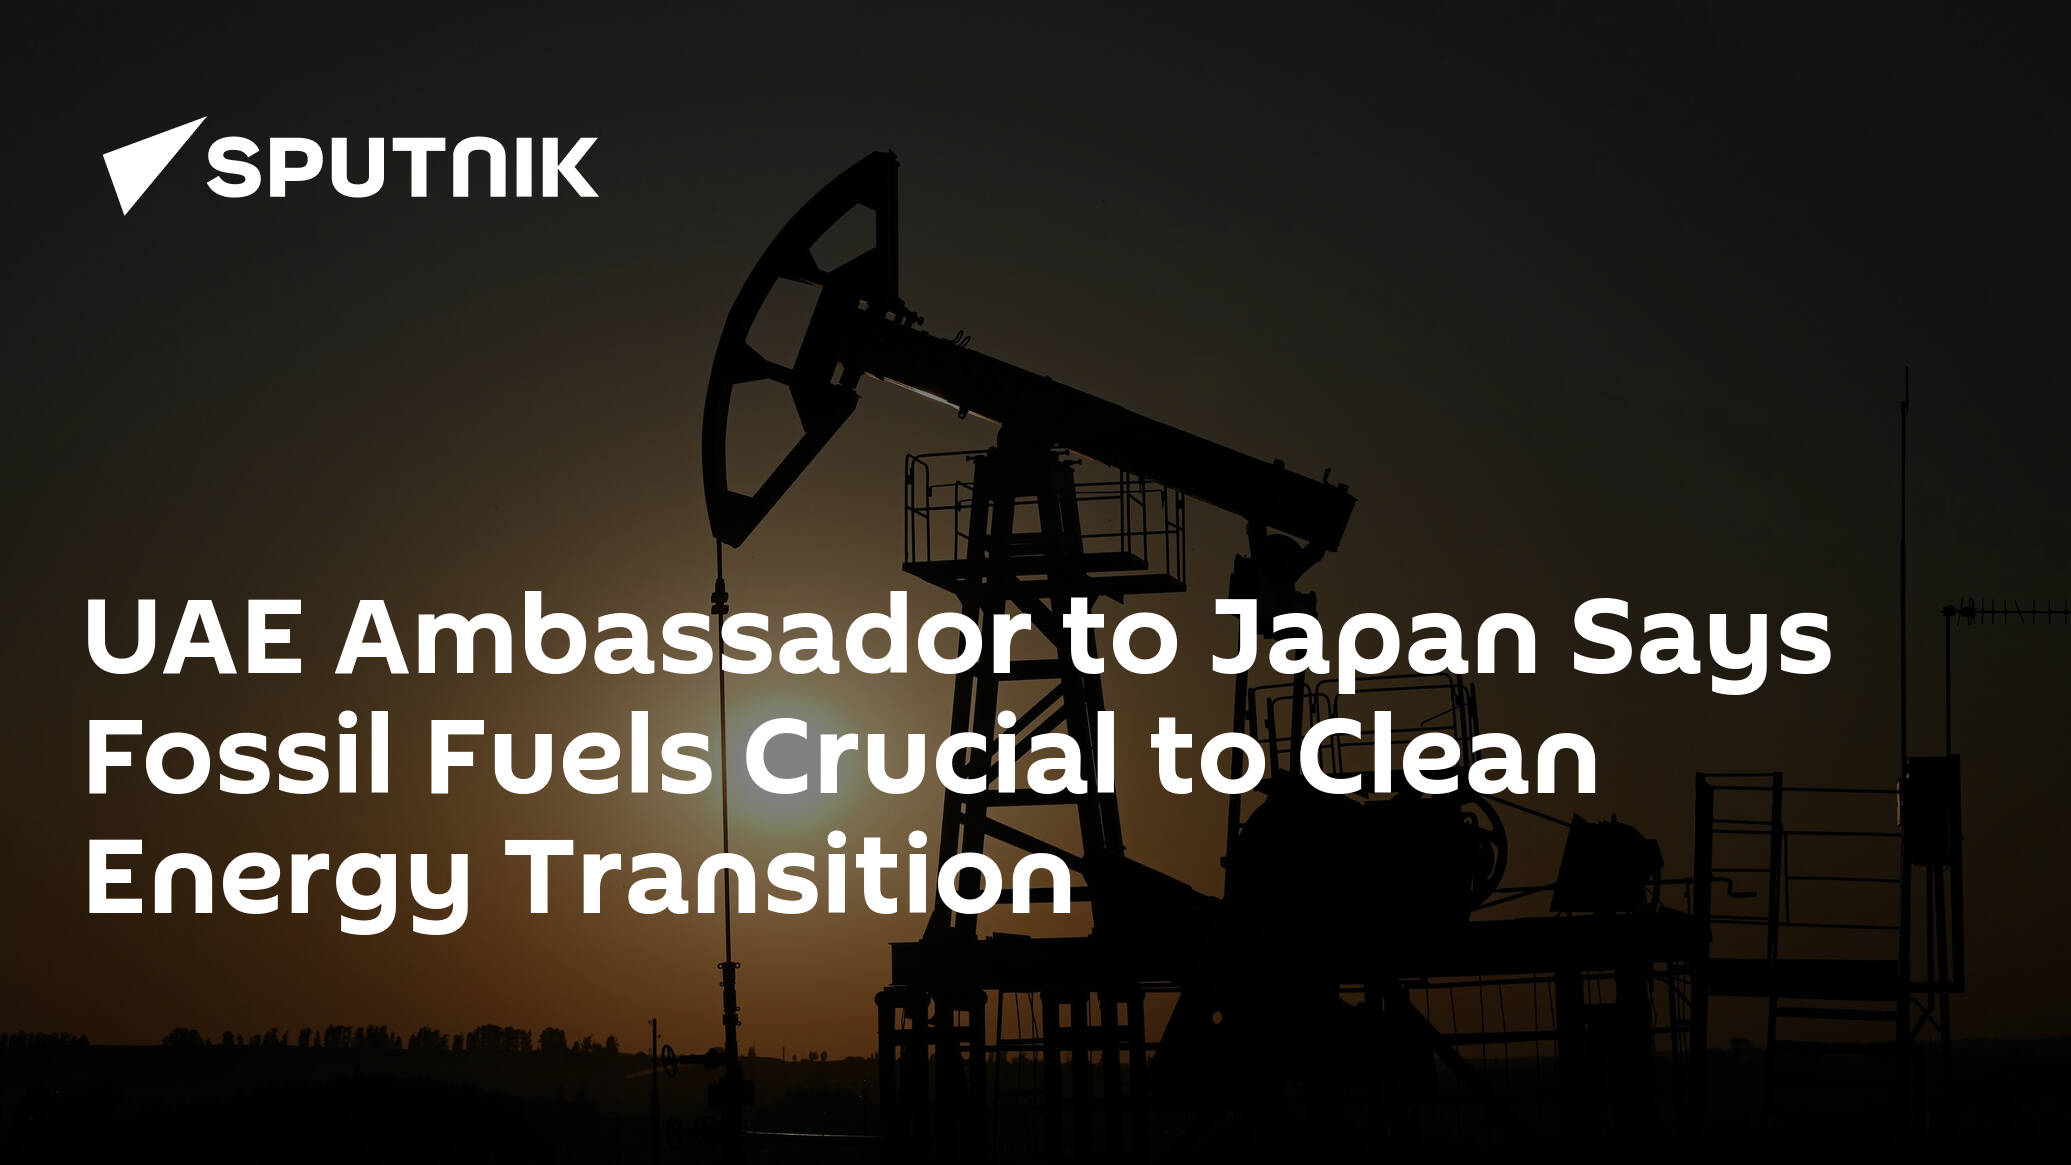 UAE Ambassador to Japan Says Fossil Fuels Crucial to Clean Energy Transition